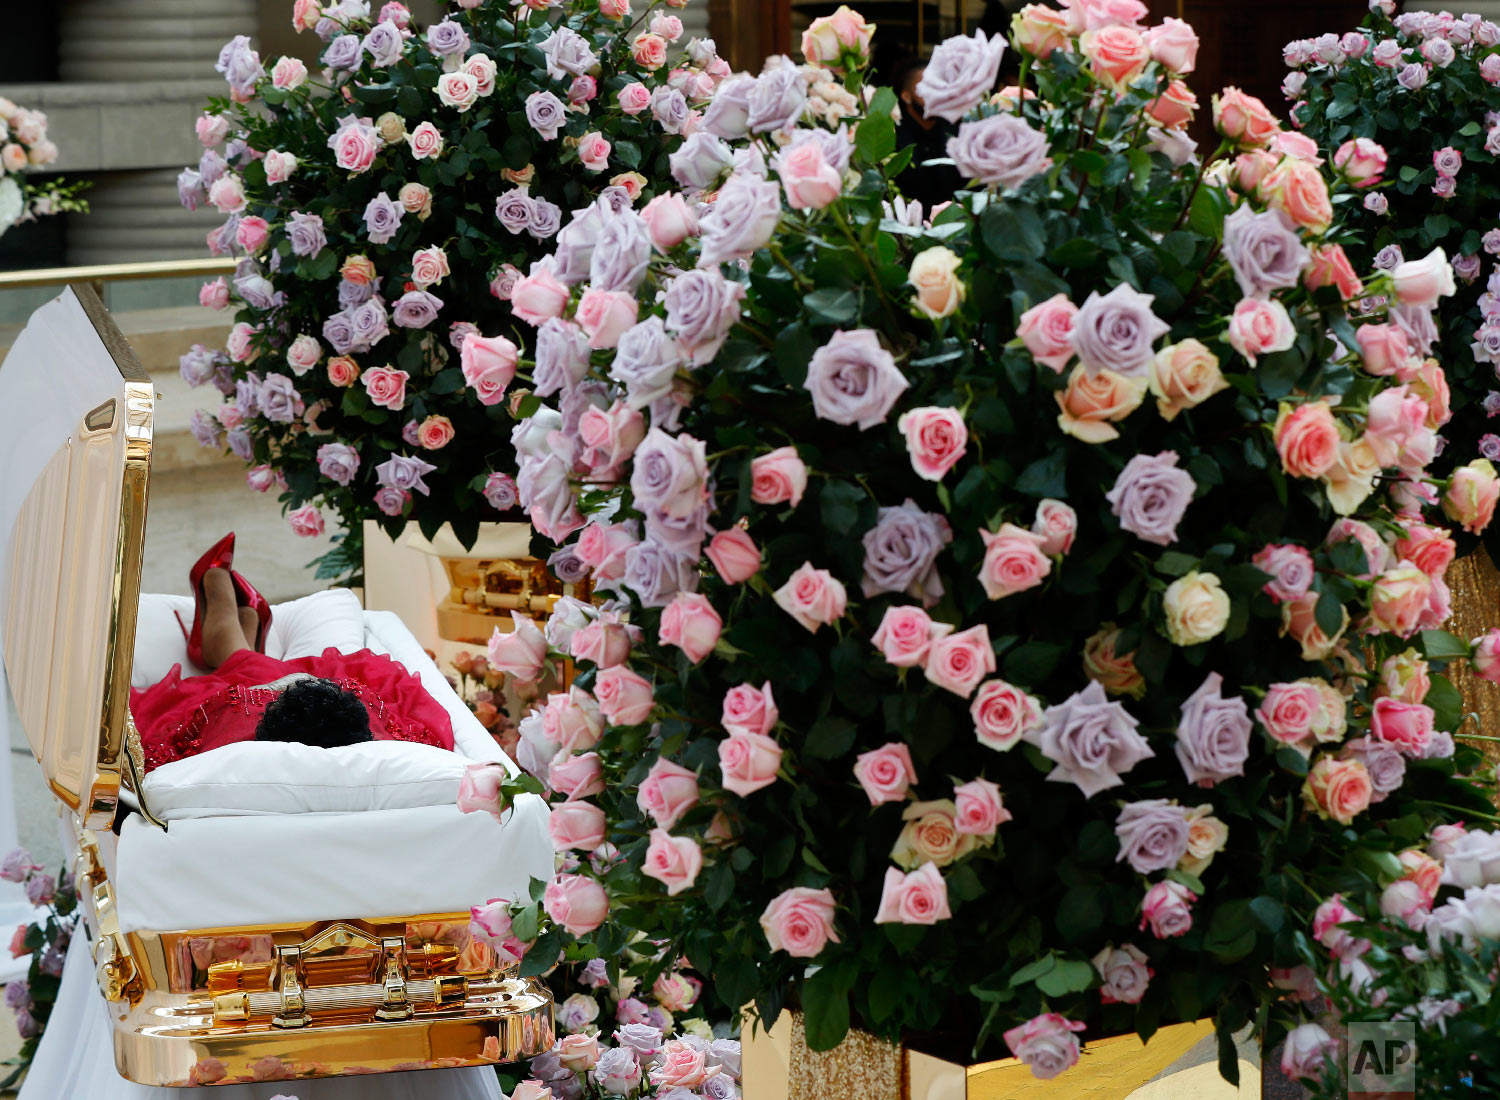  Aretha Franklin lies in her casket at the Charles H. Wright Museum of African American History in Detroit during a public visitation on Aug. 28, 2018. Franklin died on Aug. 16 of pancreatic cancer at the age of 76. (AP Photo/Paul Sancya, Pool) 